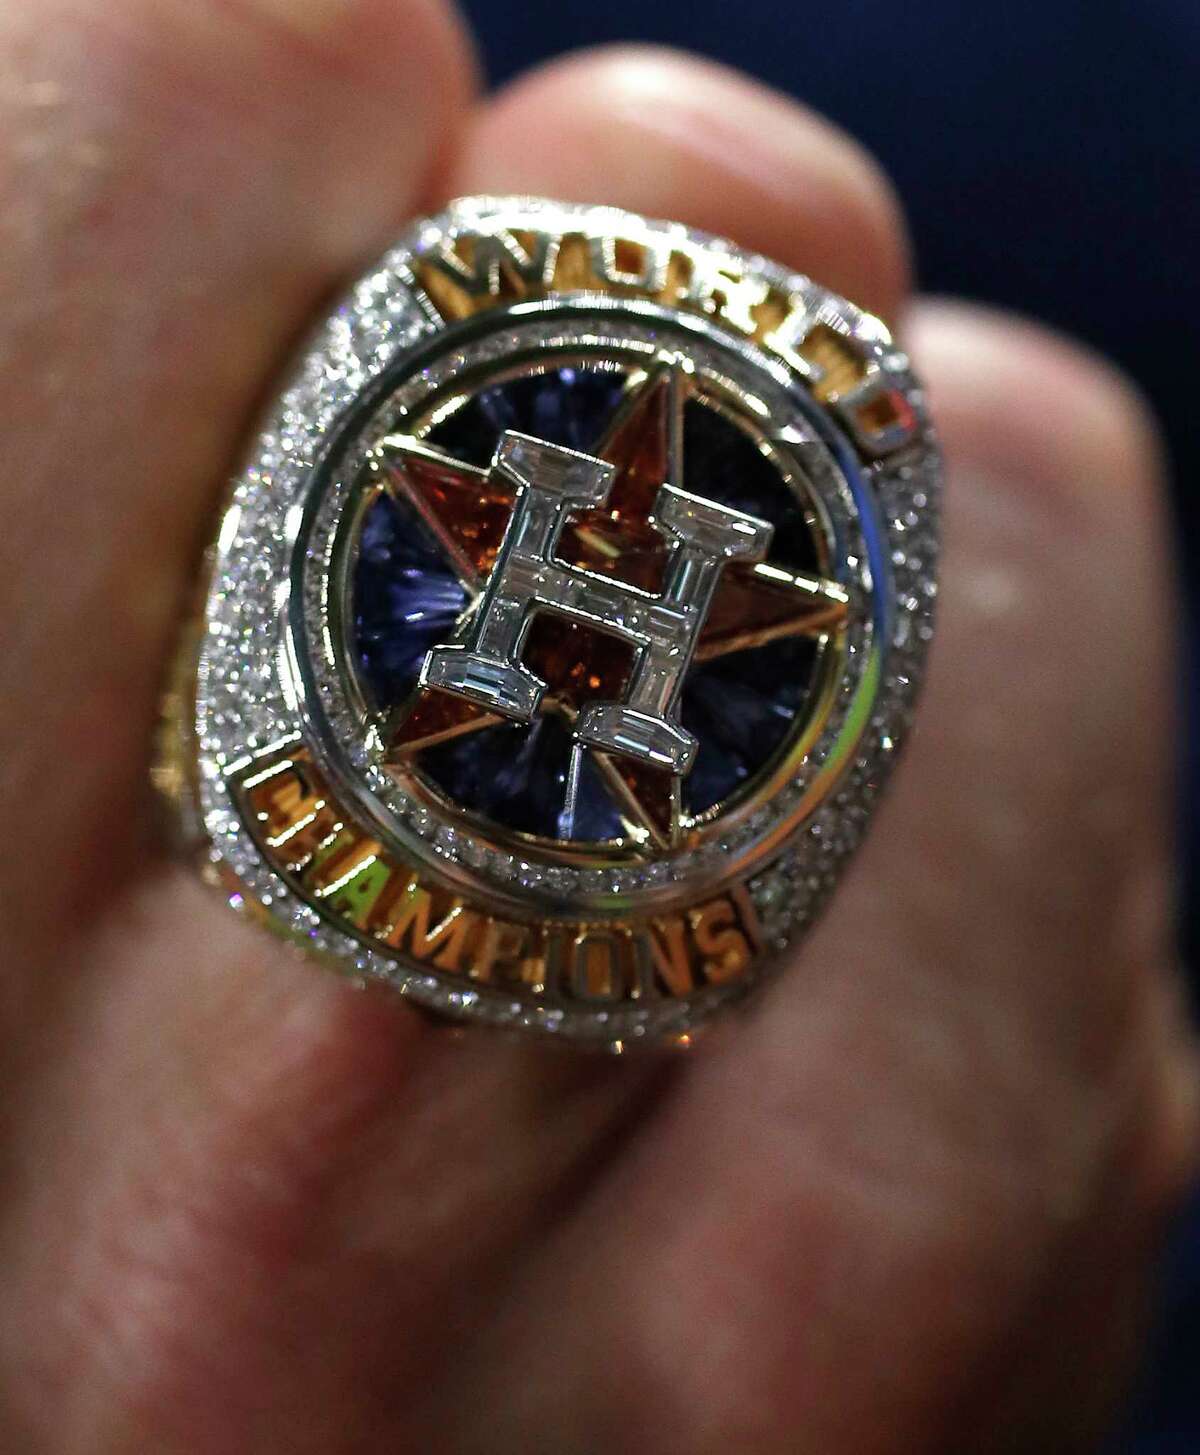 Astros Receive World Series Rings Tuesday